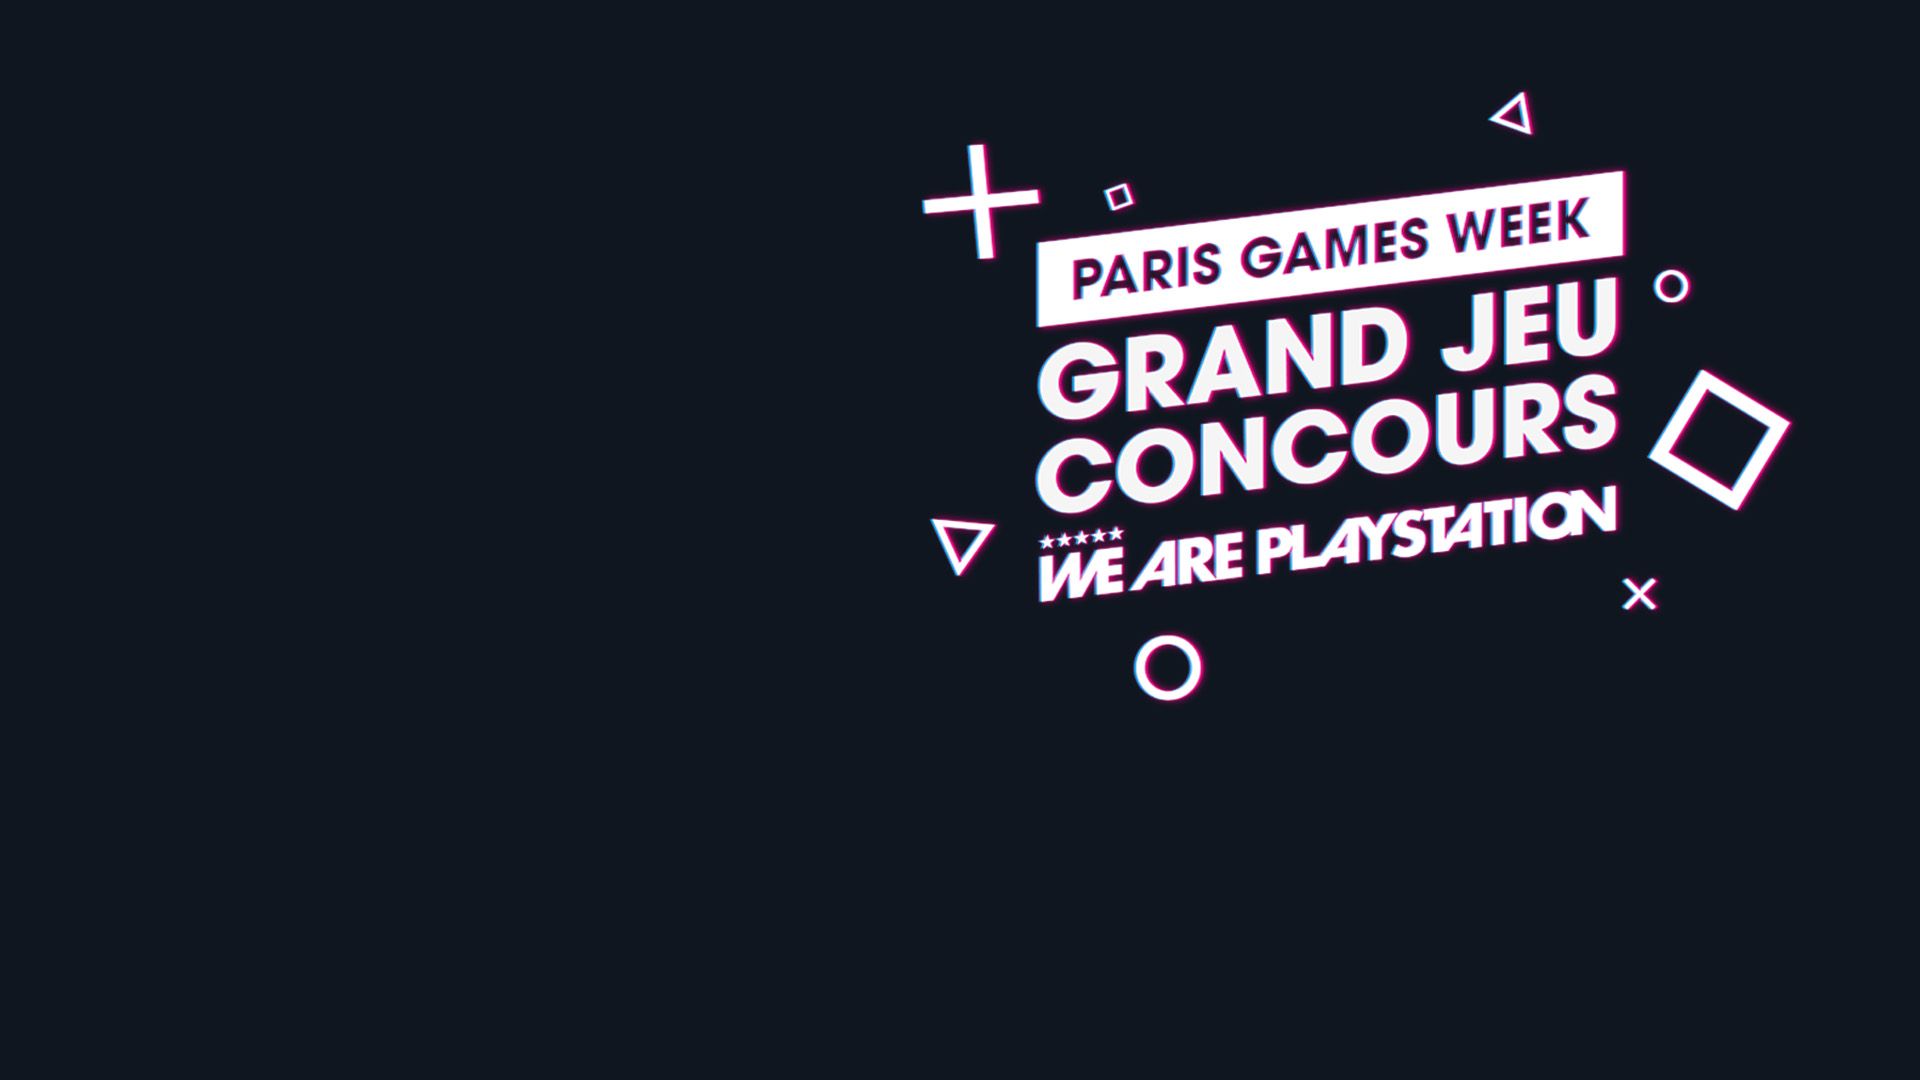 Grand Concours - We Are PlayStation x Paris Games Week